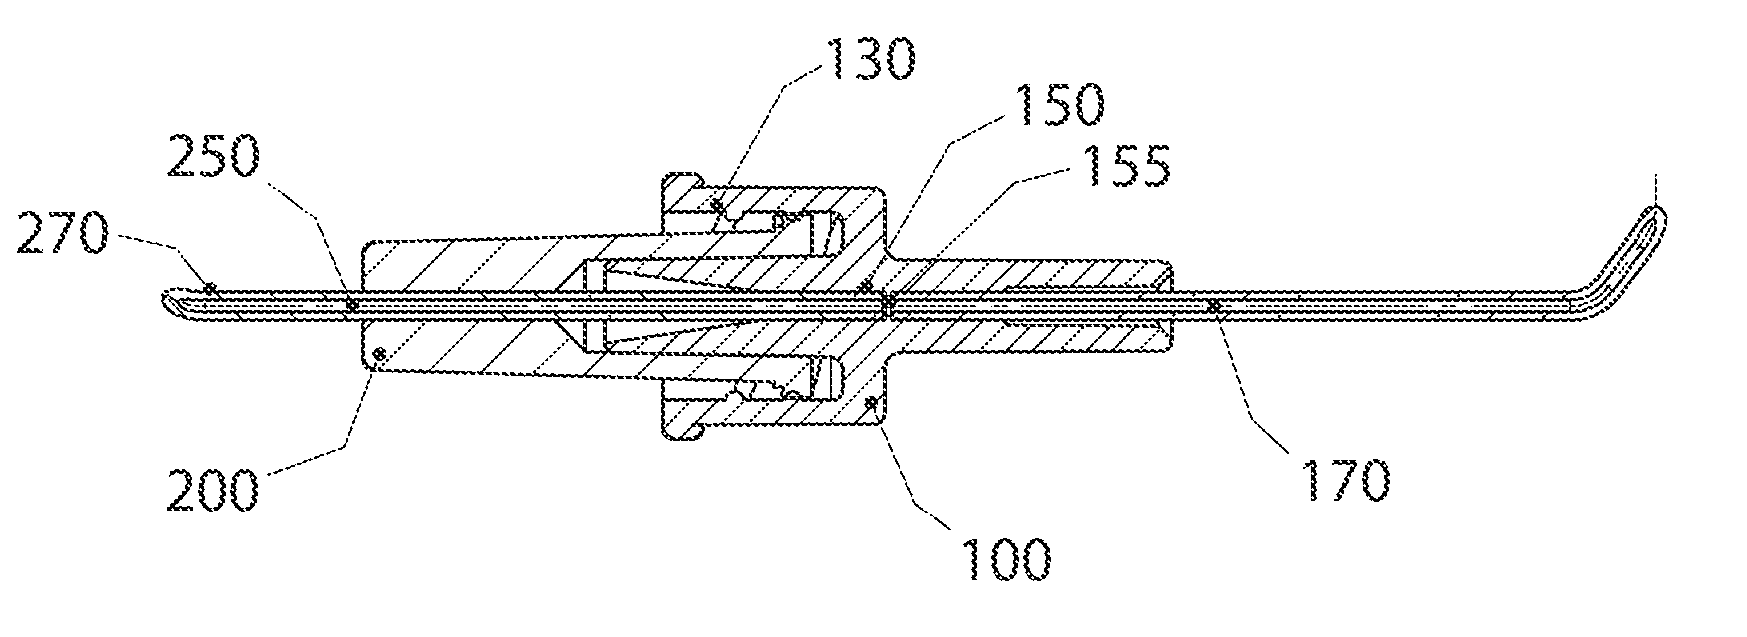 Connector for Connecting Parts of a Medical Device